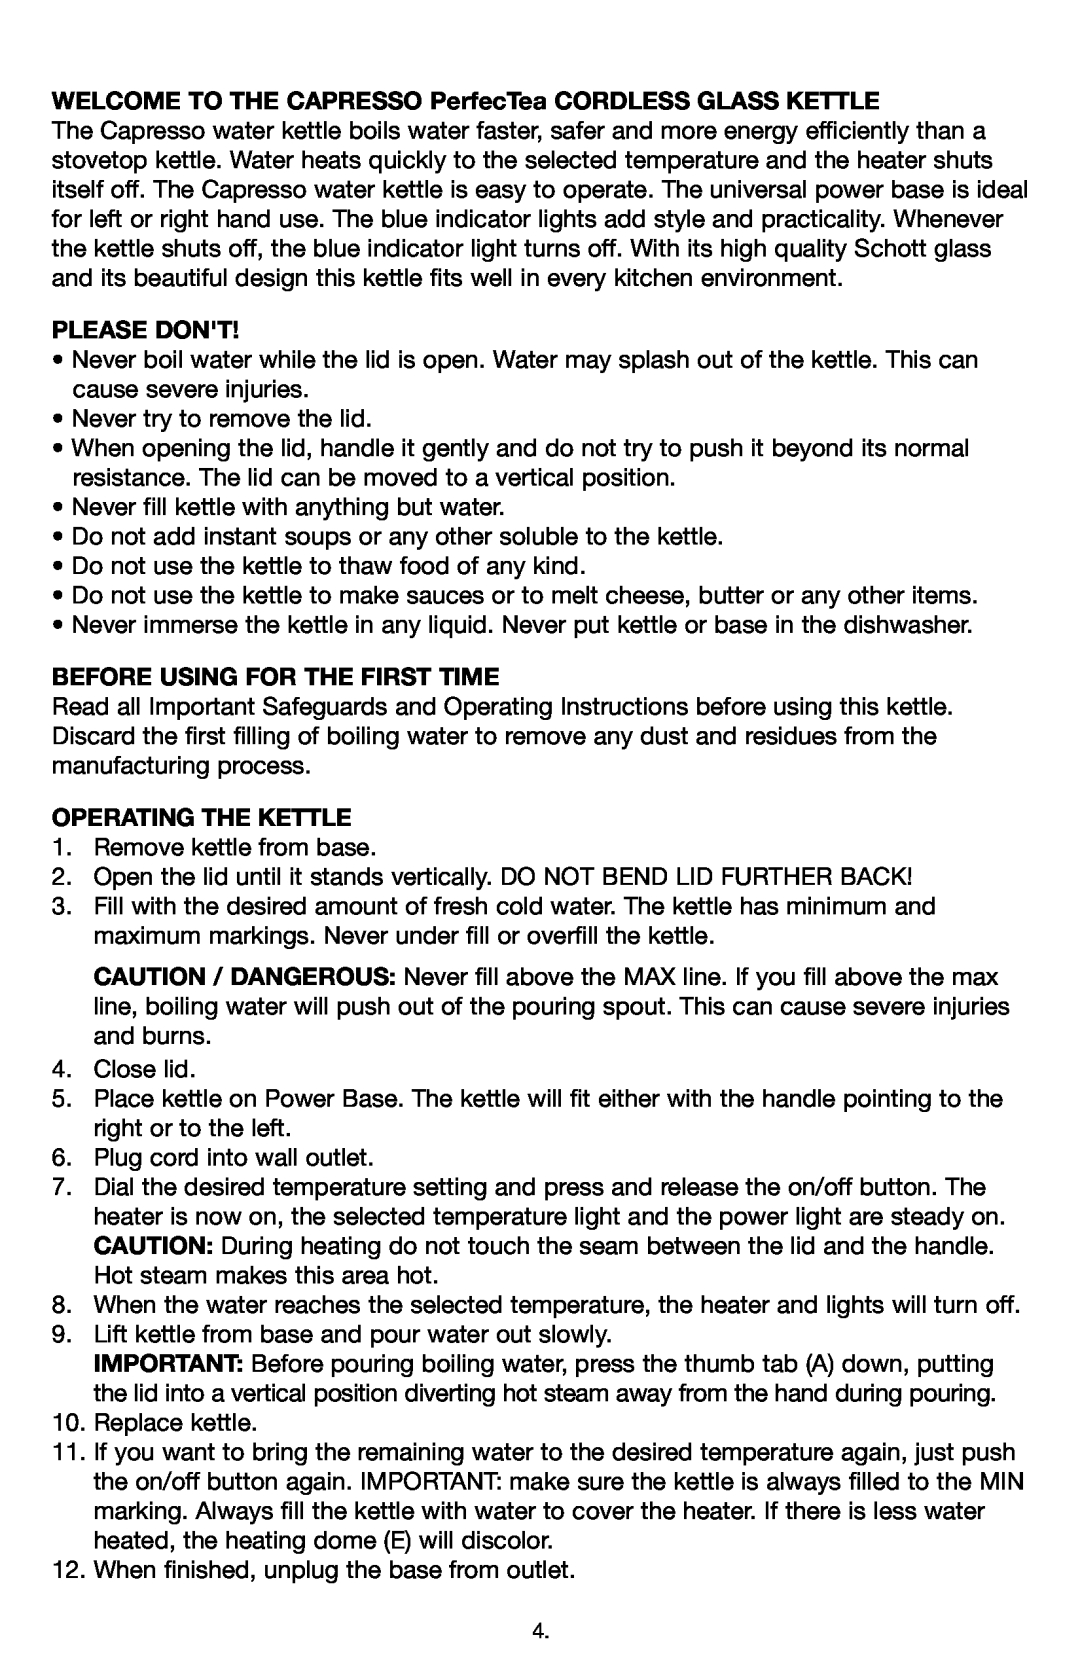 Capresso 260, PT1109 operating instructions Please Dont, Before Using For The First Time, Operating The Kettle 